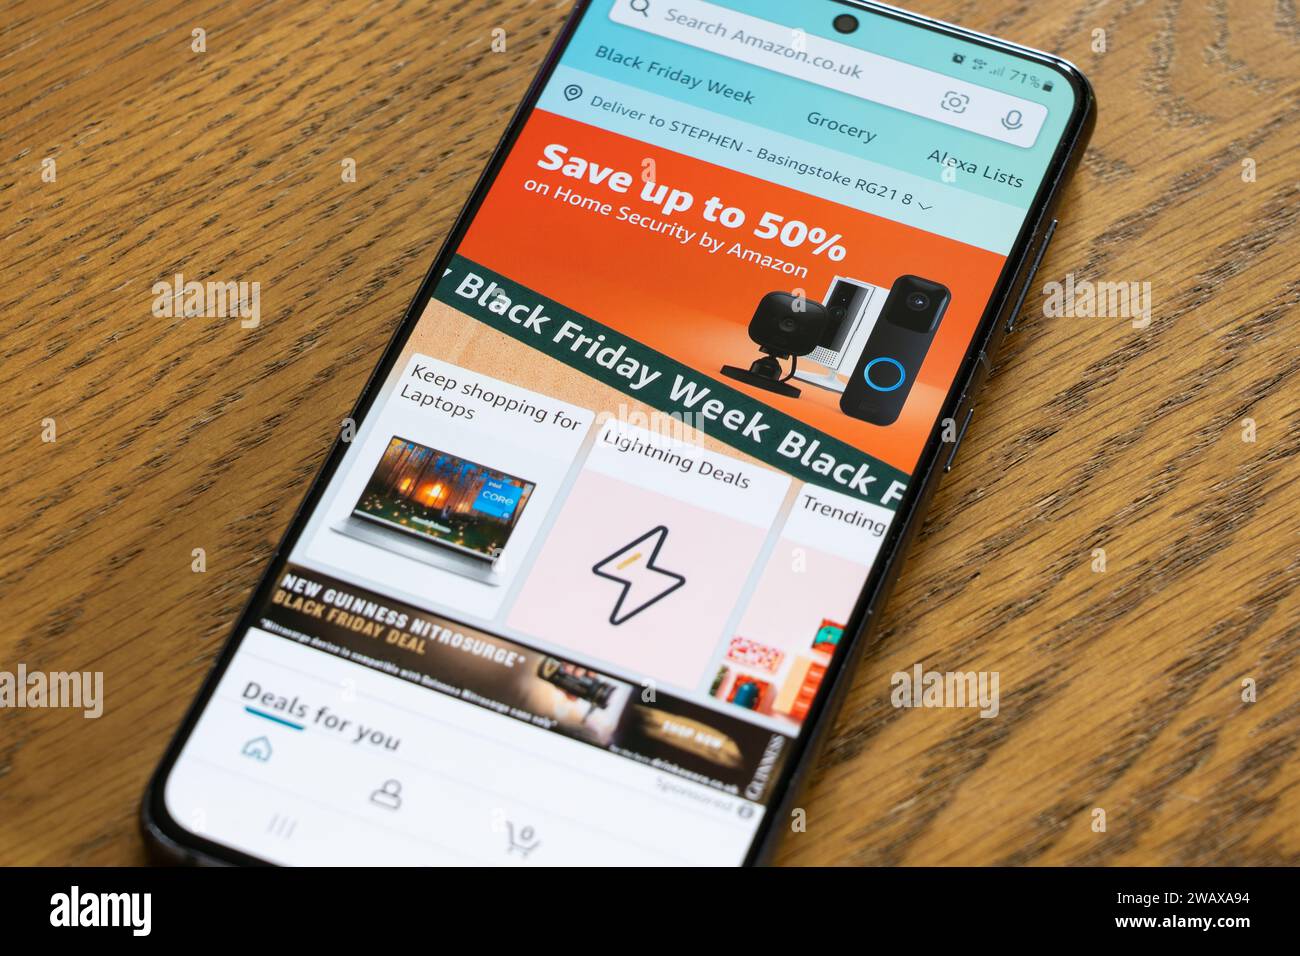 Black Friday Week with big savings advertising banner and page from the Amazon shopping app on a smartphone screen, UK Stock Photo